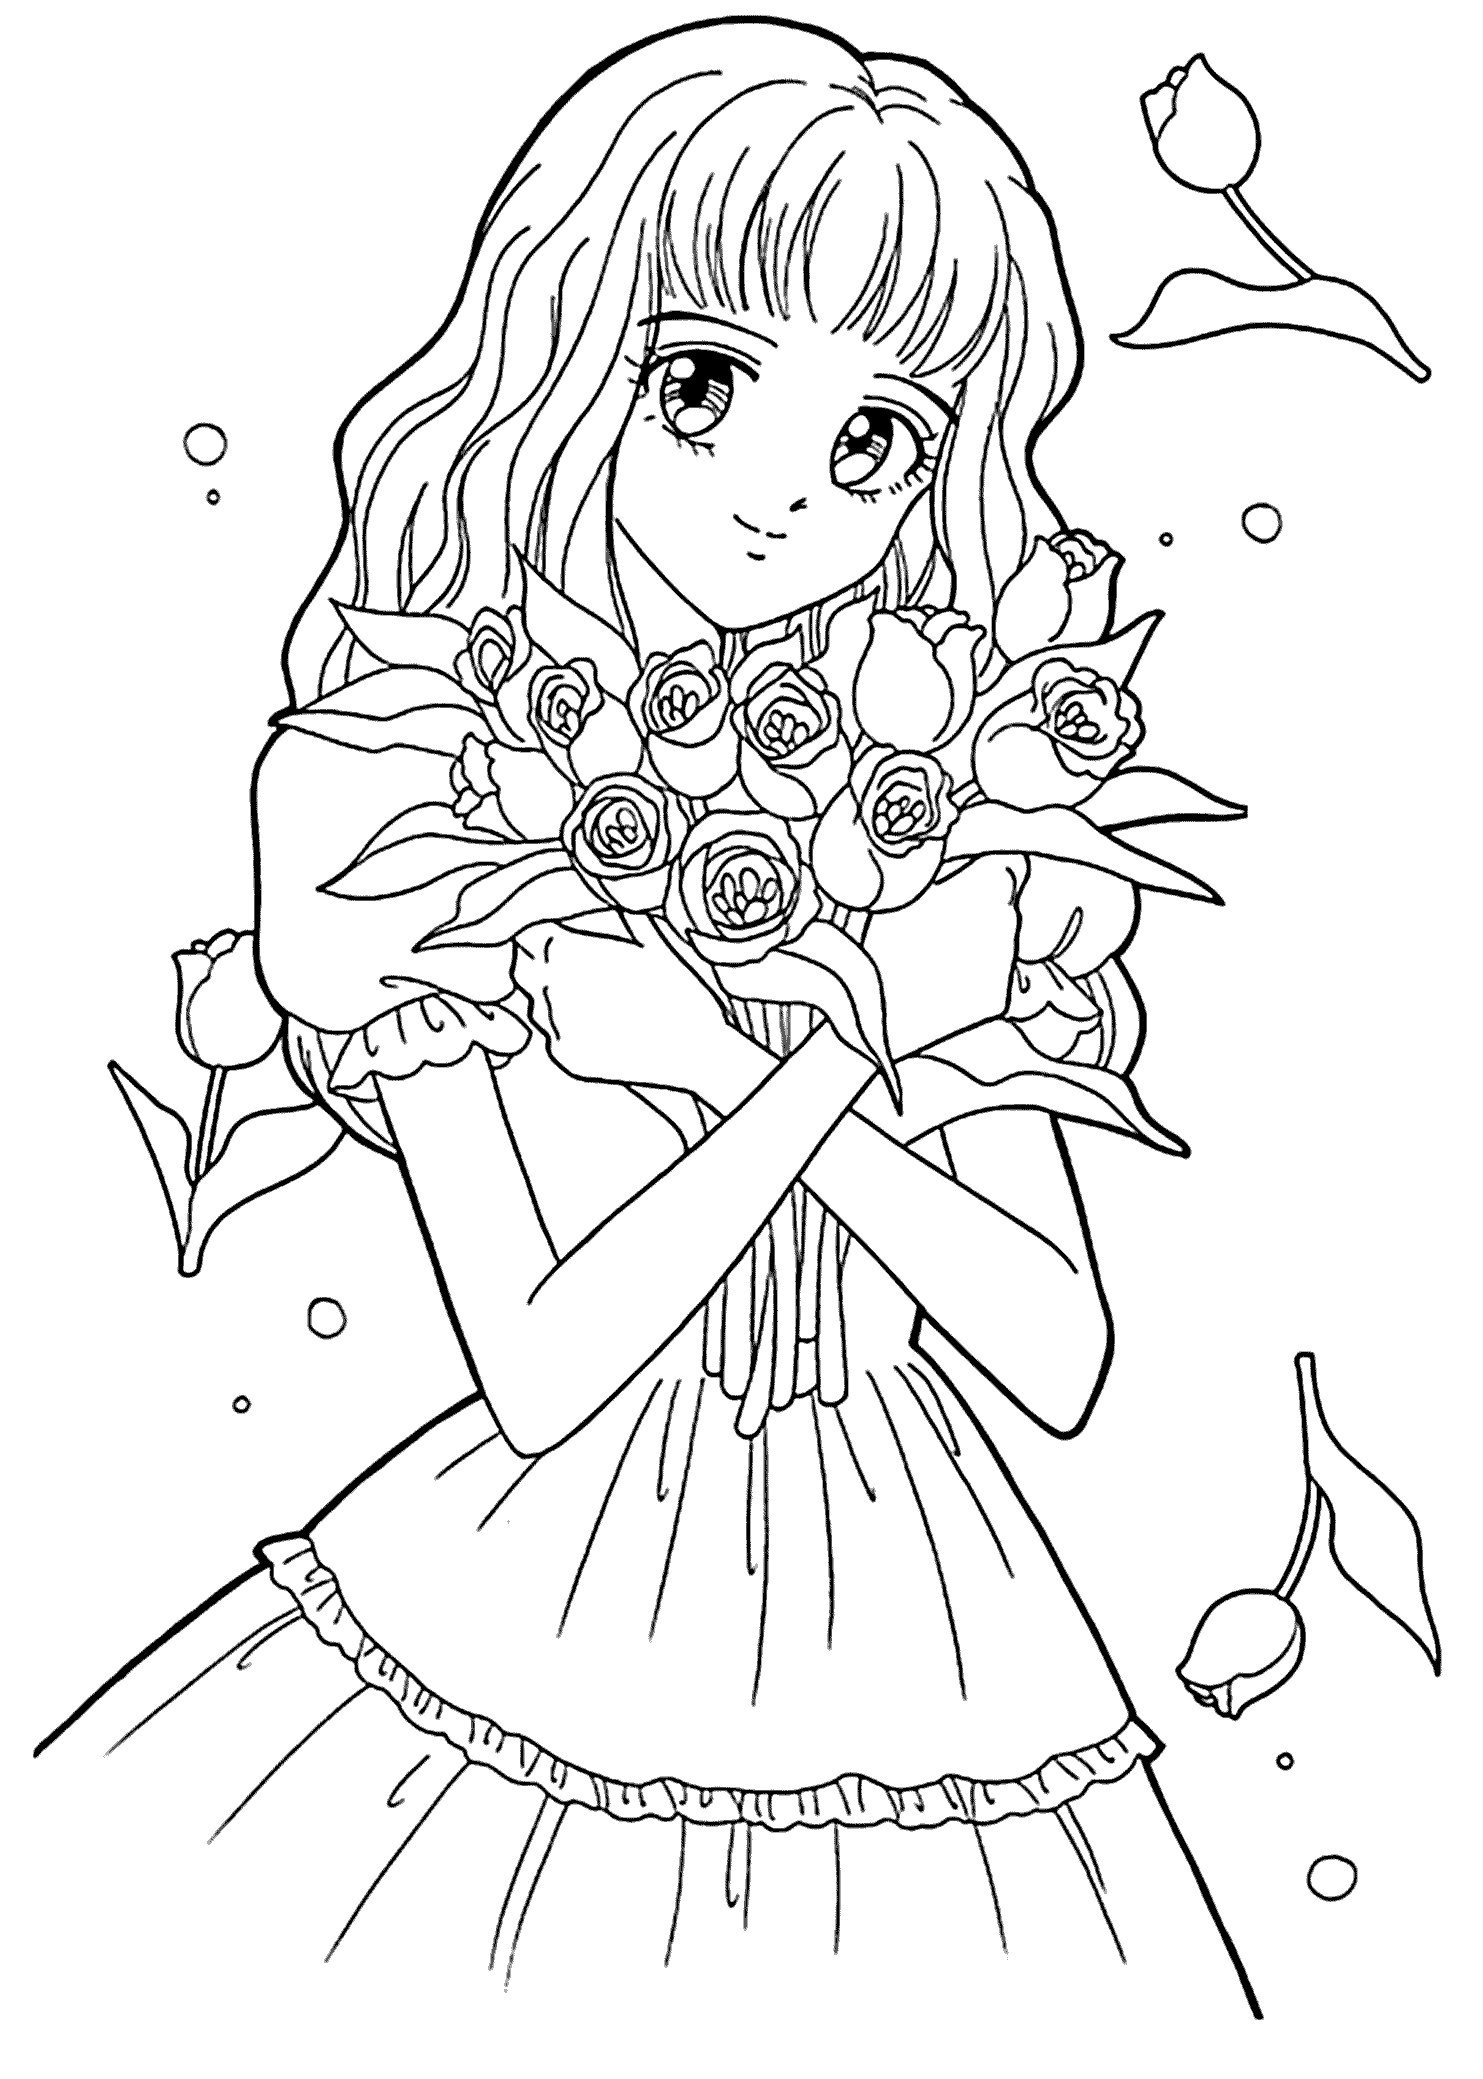 Cute Girl Coloring Sheets For Kids
 Best Free Printable Coloring Pages for Kids and Teens